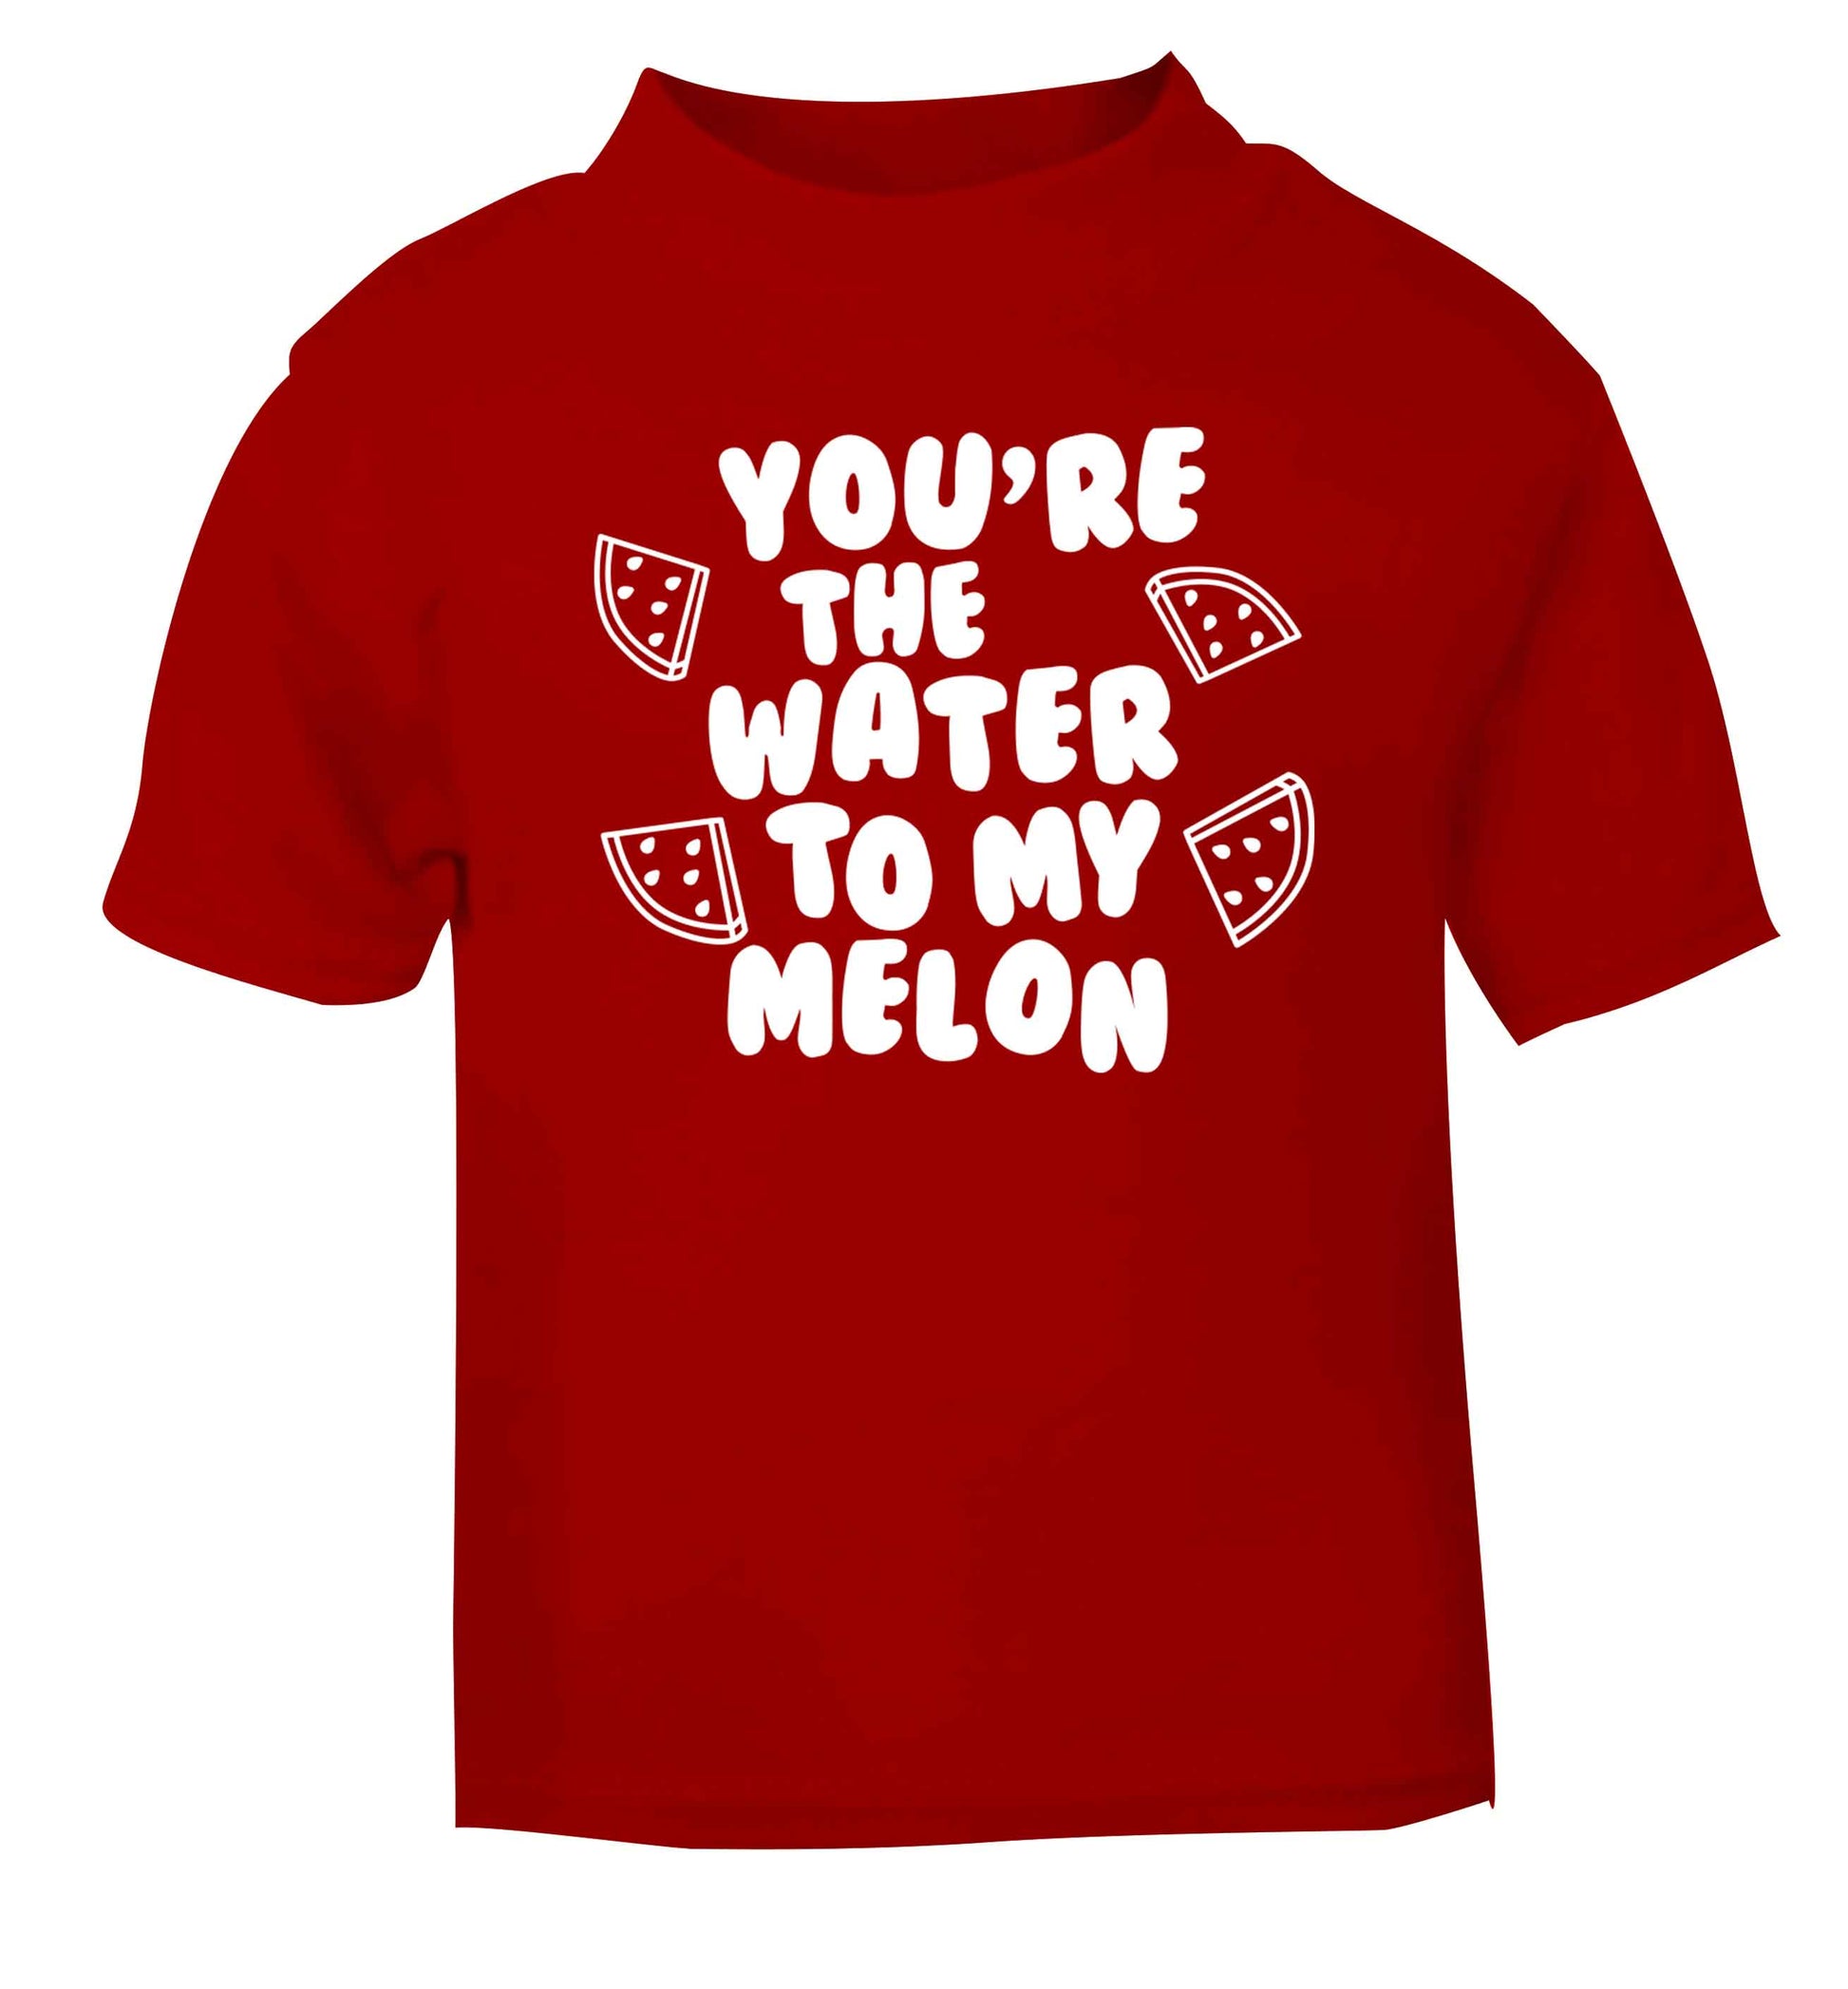 You're the water to my melon red baby toddler Tshirt 2 Years